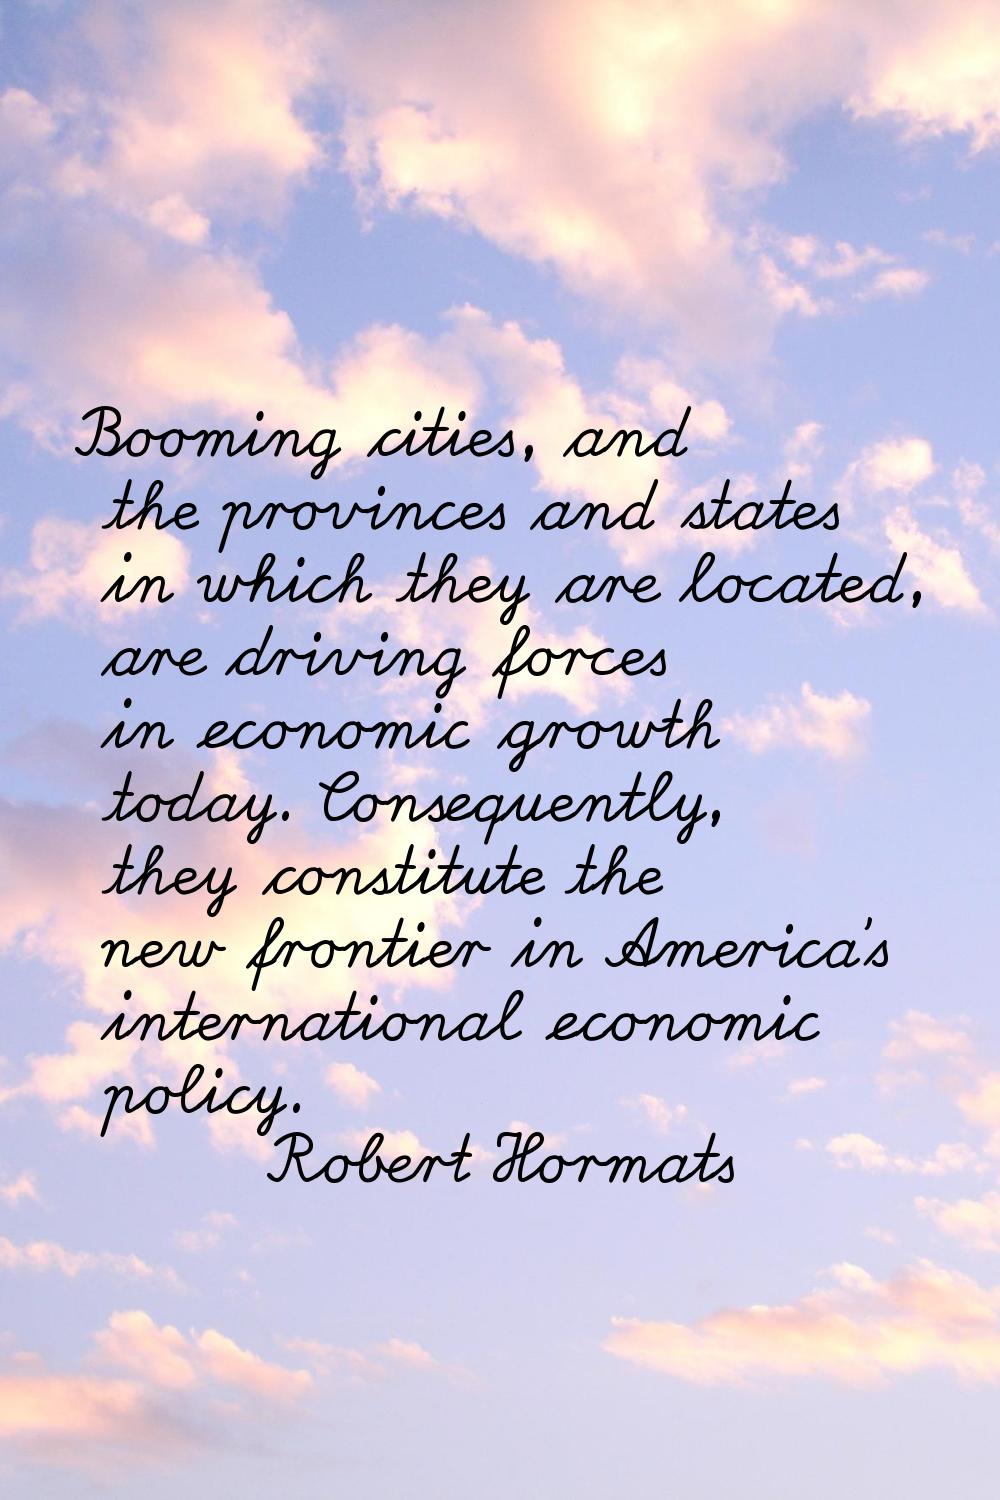 Booming cities, and the provinces and states in which they are located, are driving forces in econo